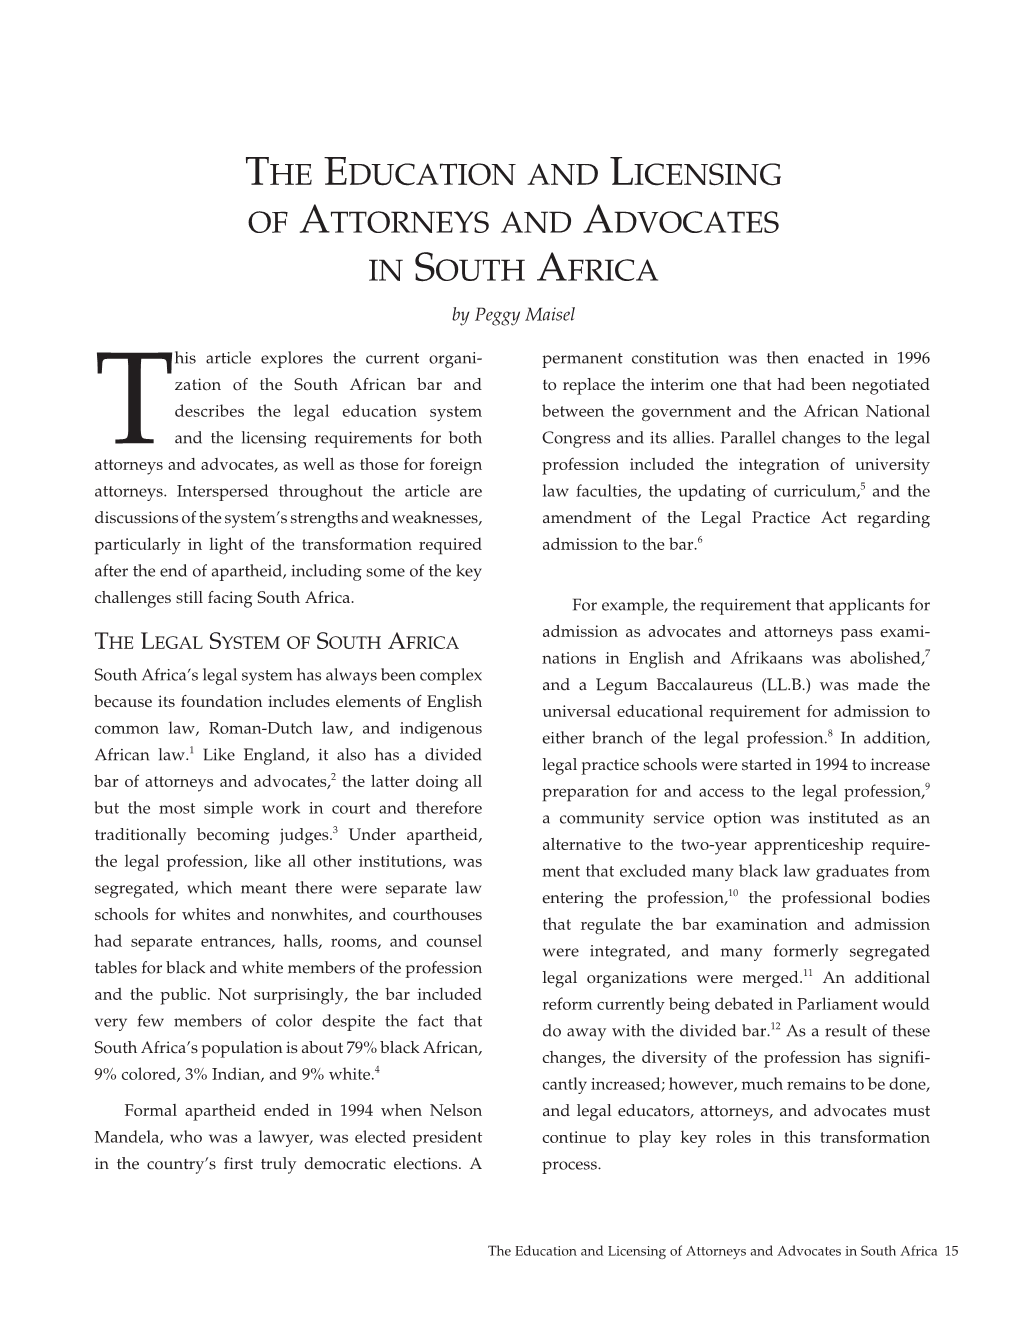 The Education and Licensing of Attorneys And